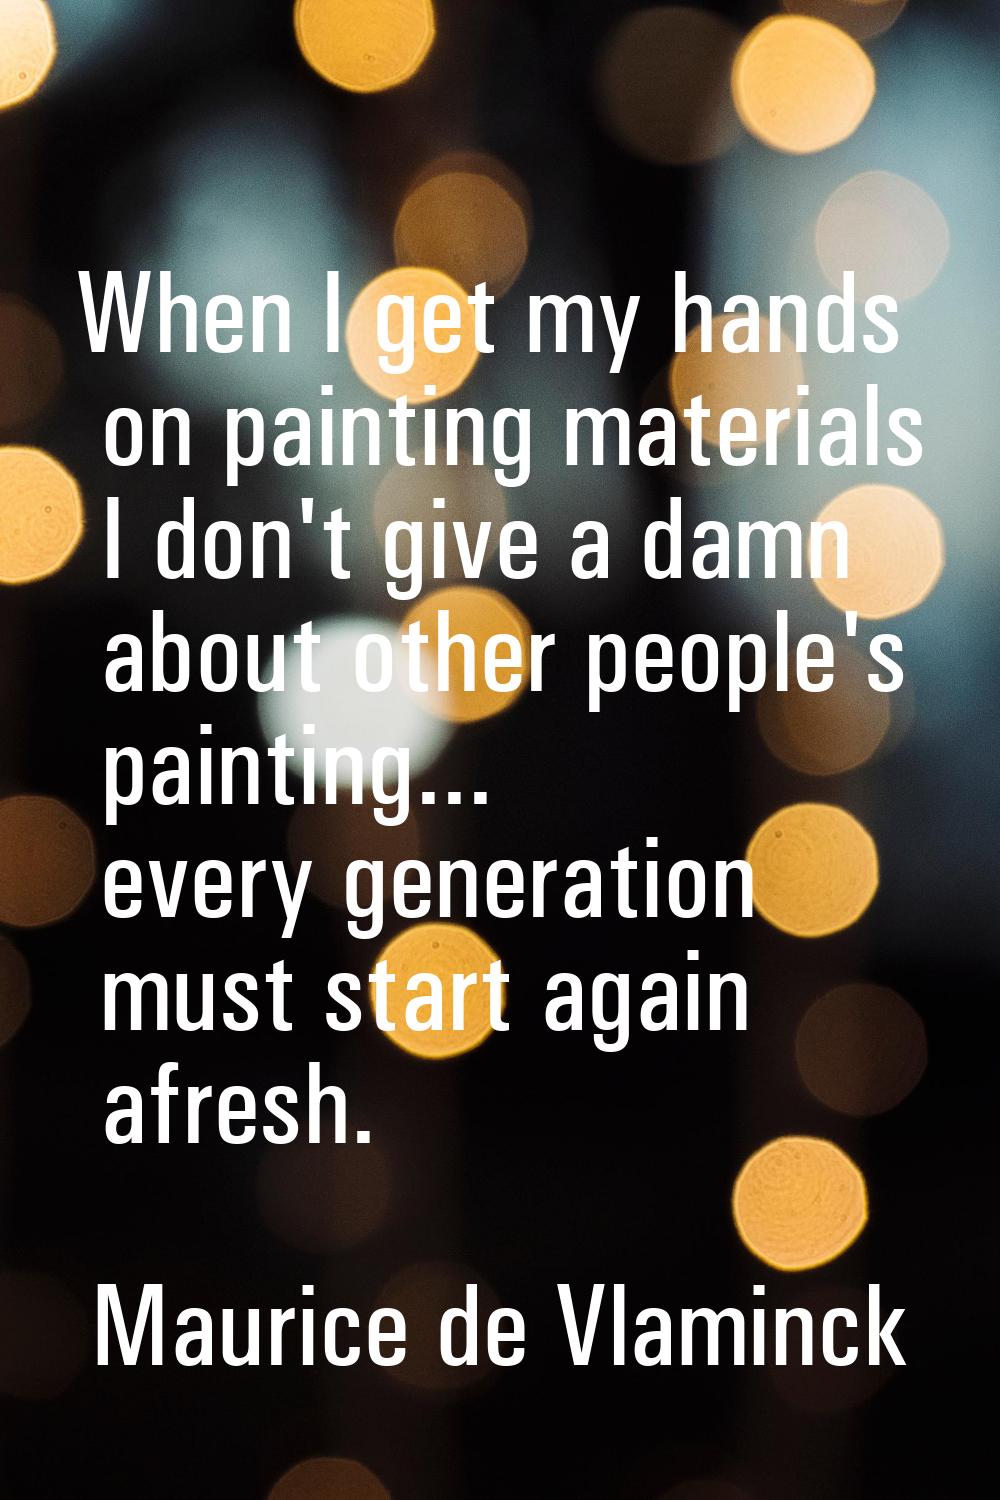 When I get my hands on painting materials I don't give a damn about other people's painting... ever